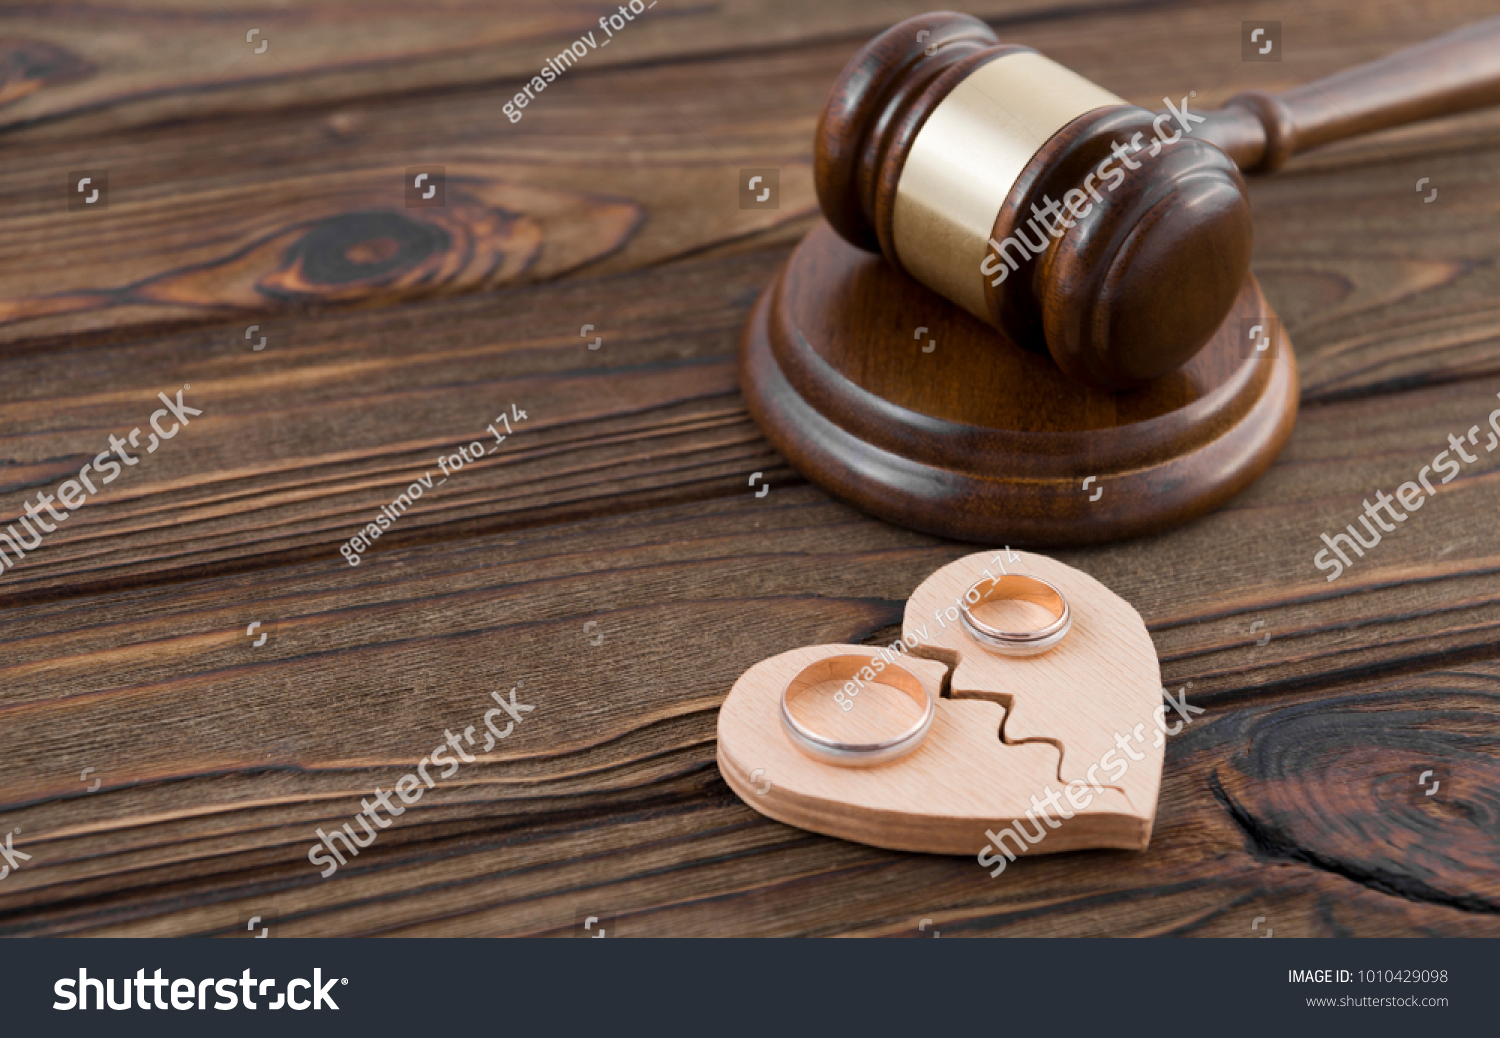 Wedding rings on the figure of a broken heart from a tree, hammer of a judge on a wooden background. Divorce divorce proceedings #1010429098